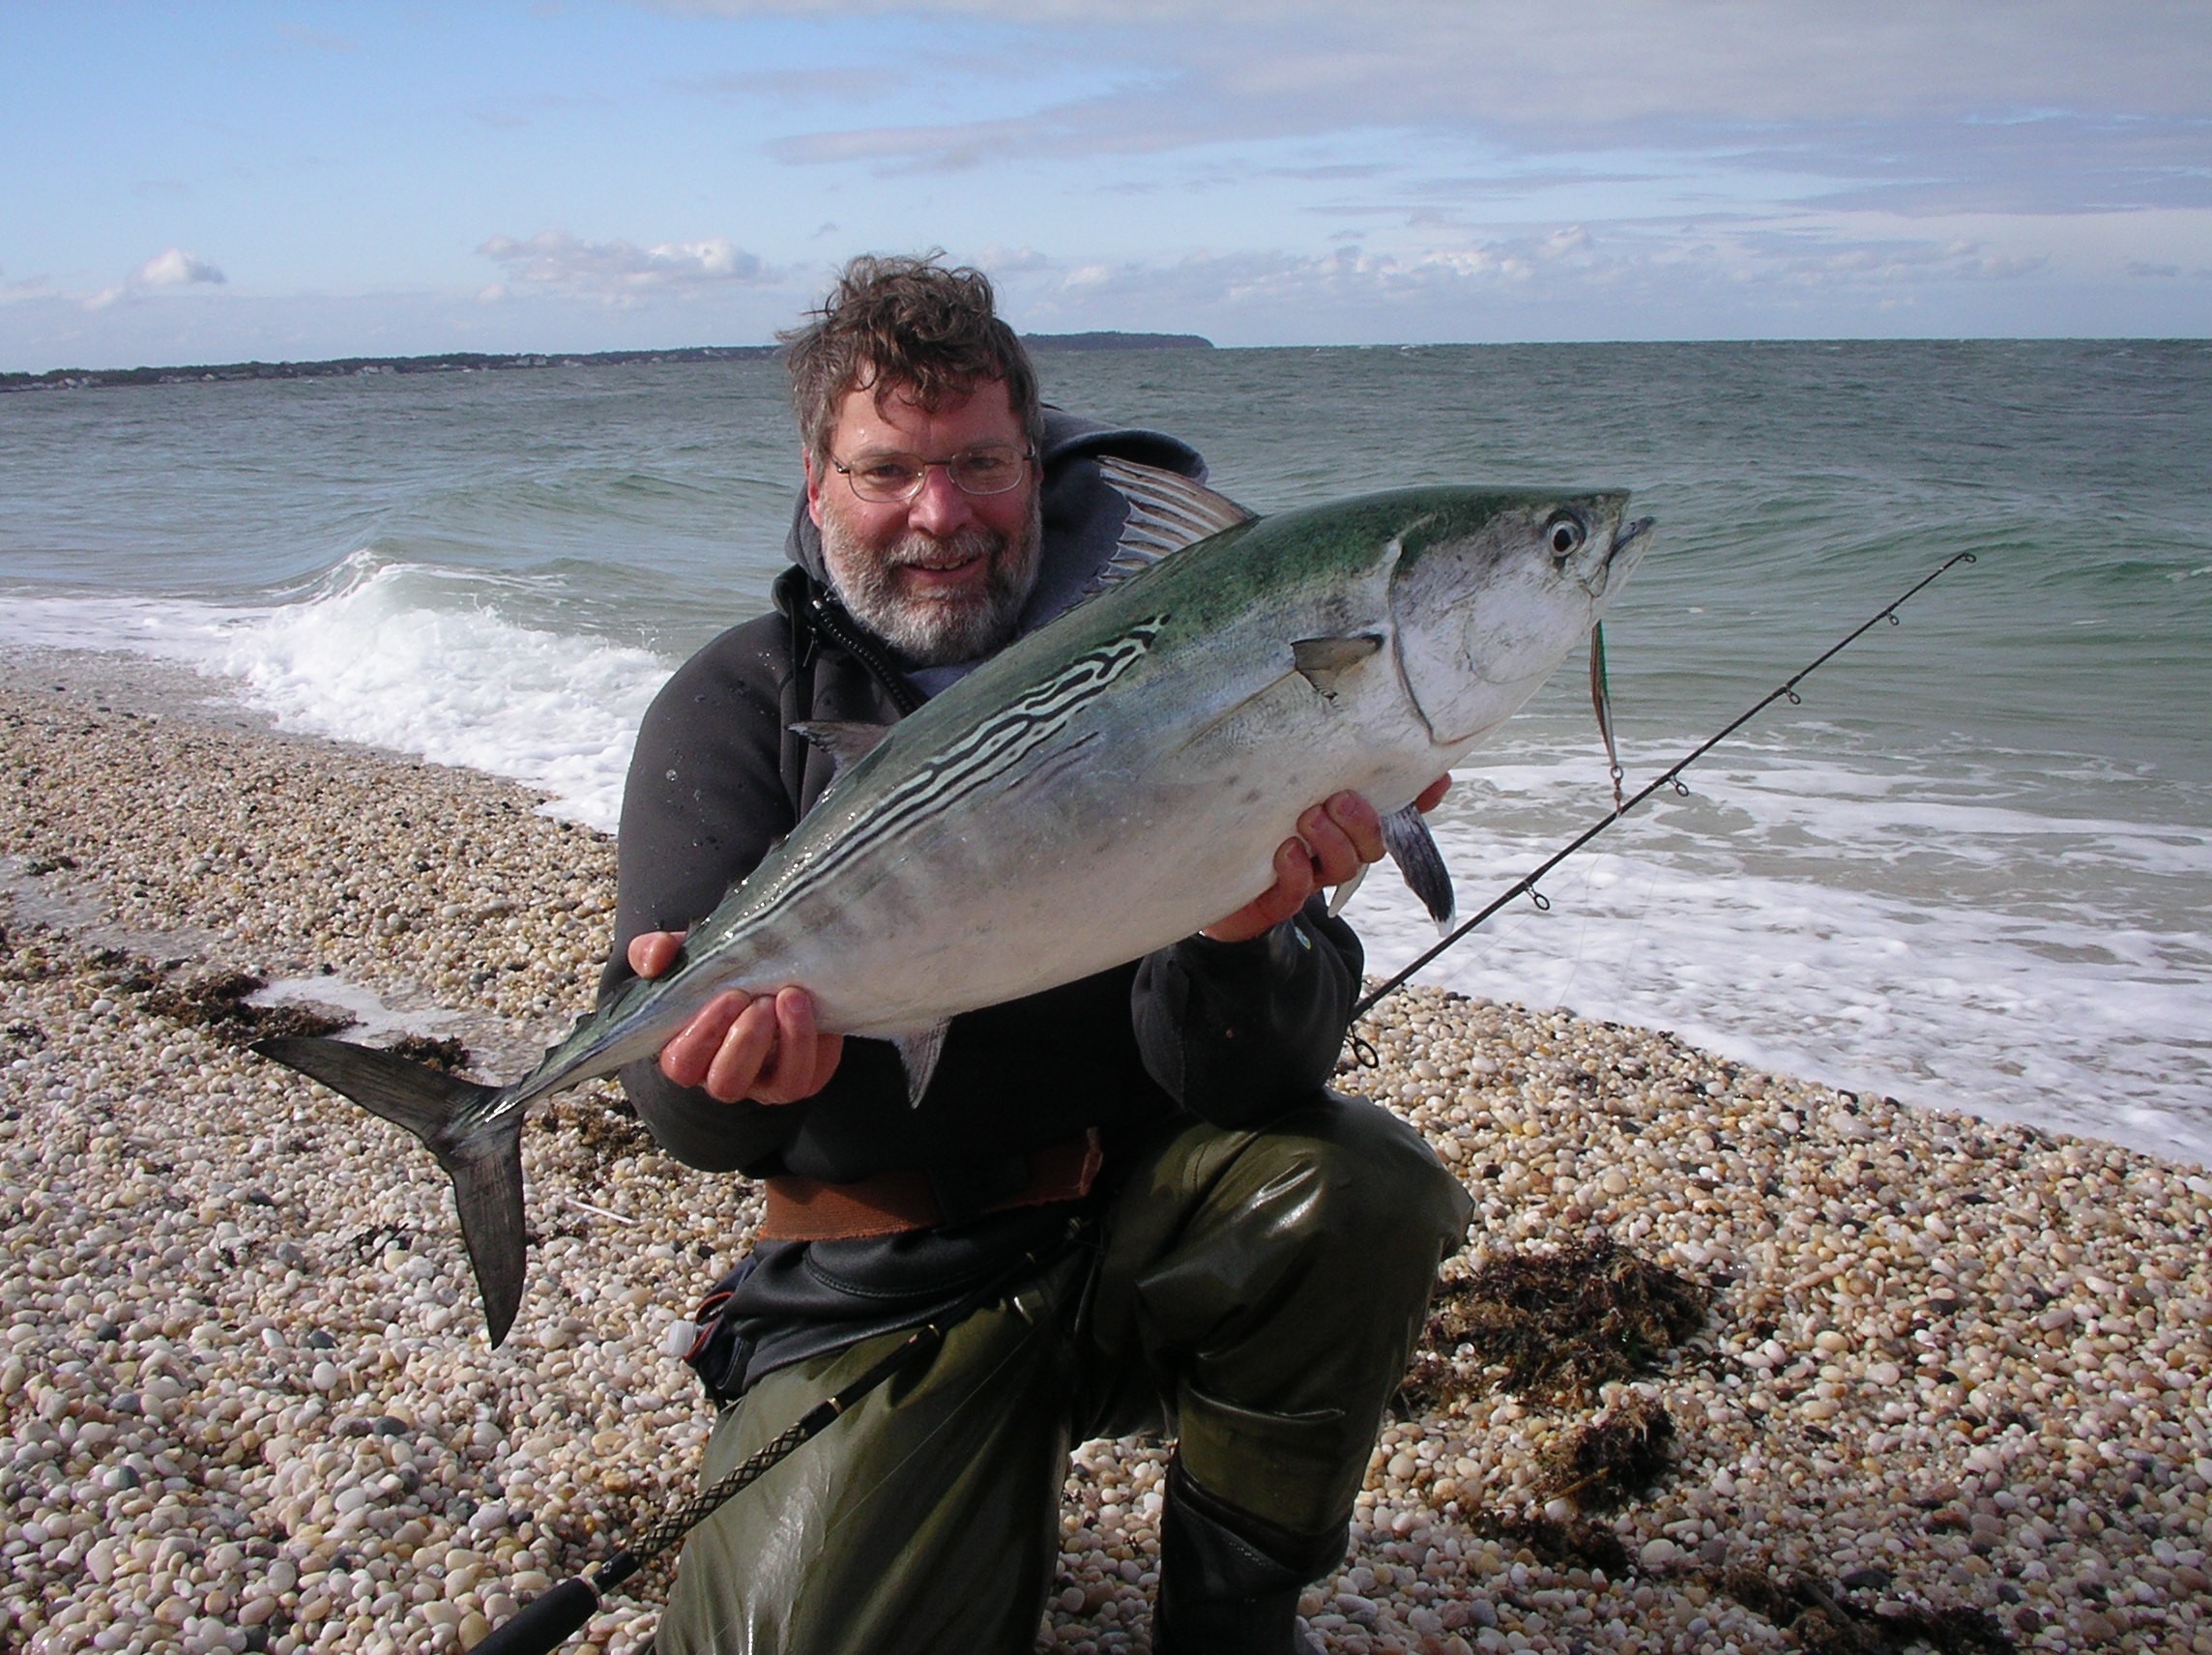 The author holding a large albacore next to the ocean